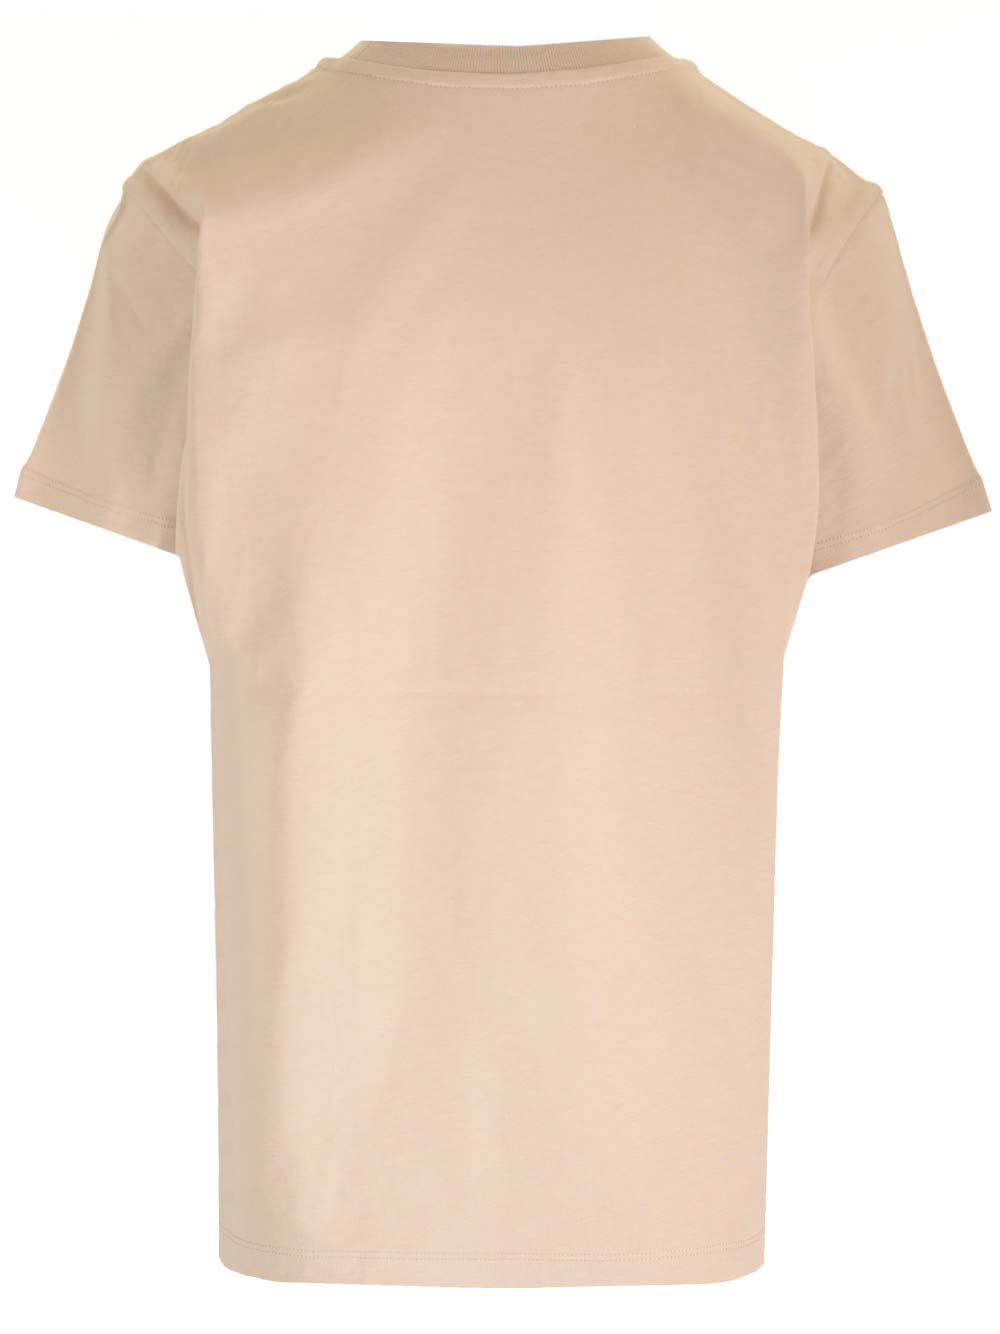 Shop Moncler Embroidered Signature T-shirt In Beige